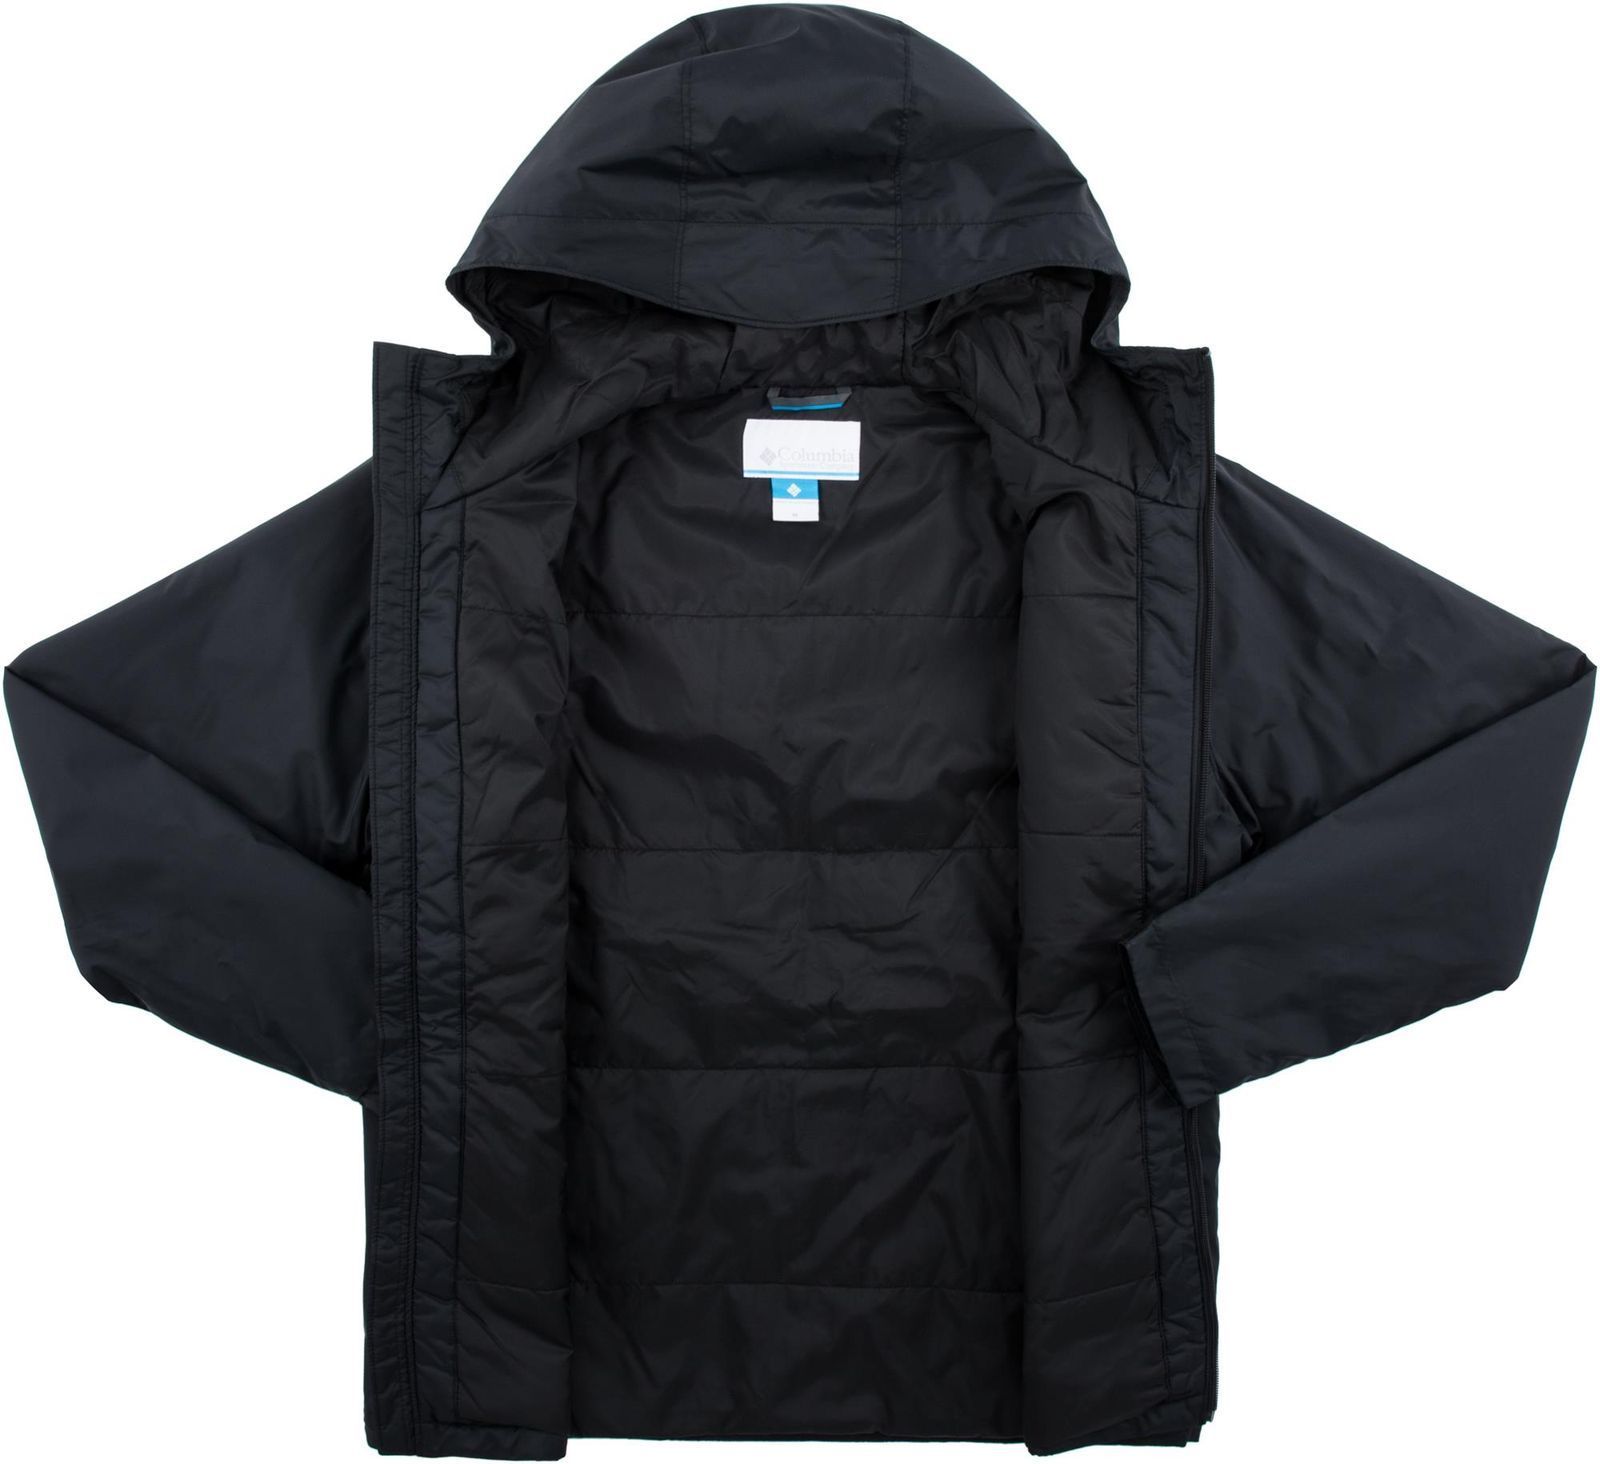   Columbia Straight Line Insulated Jacket, : . 1839691-010.  S (44/46)